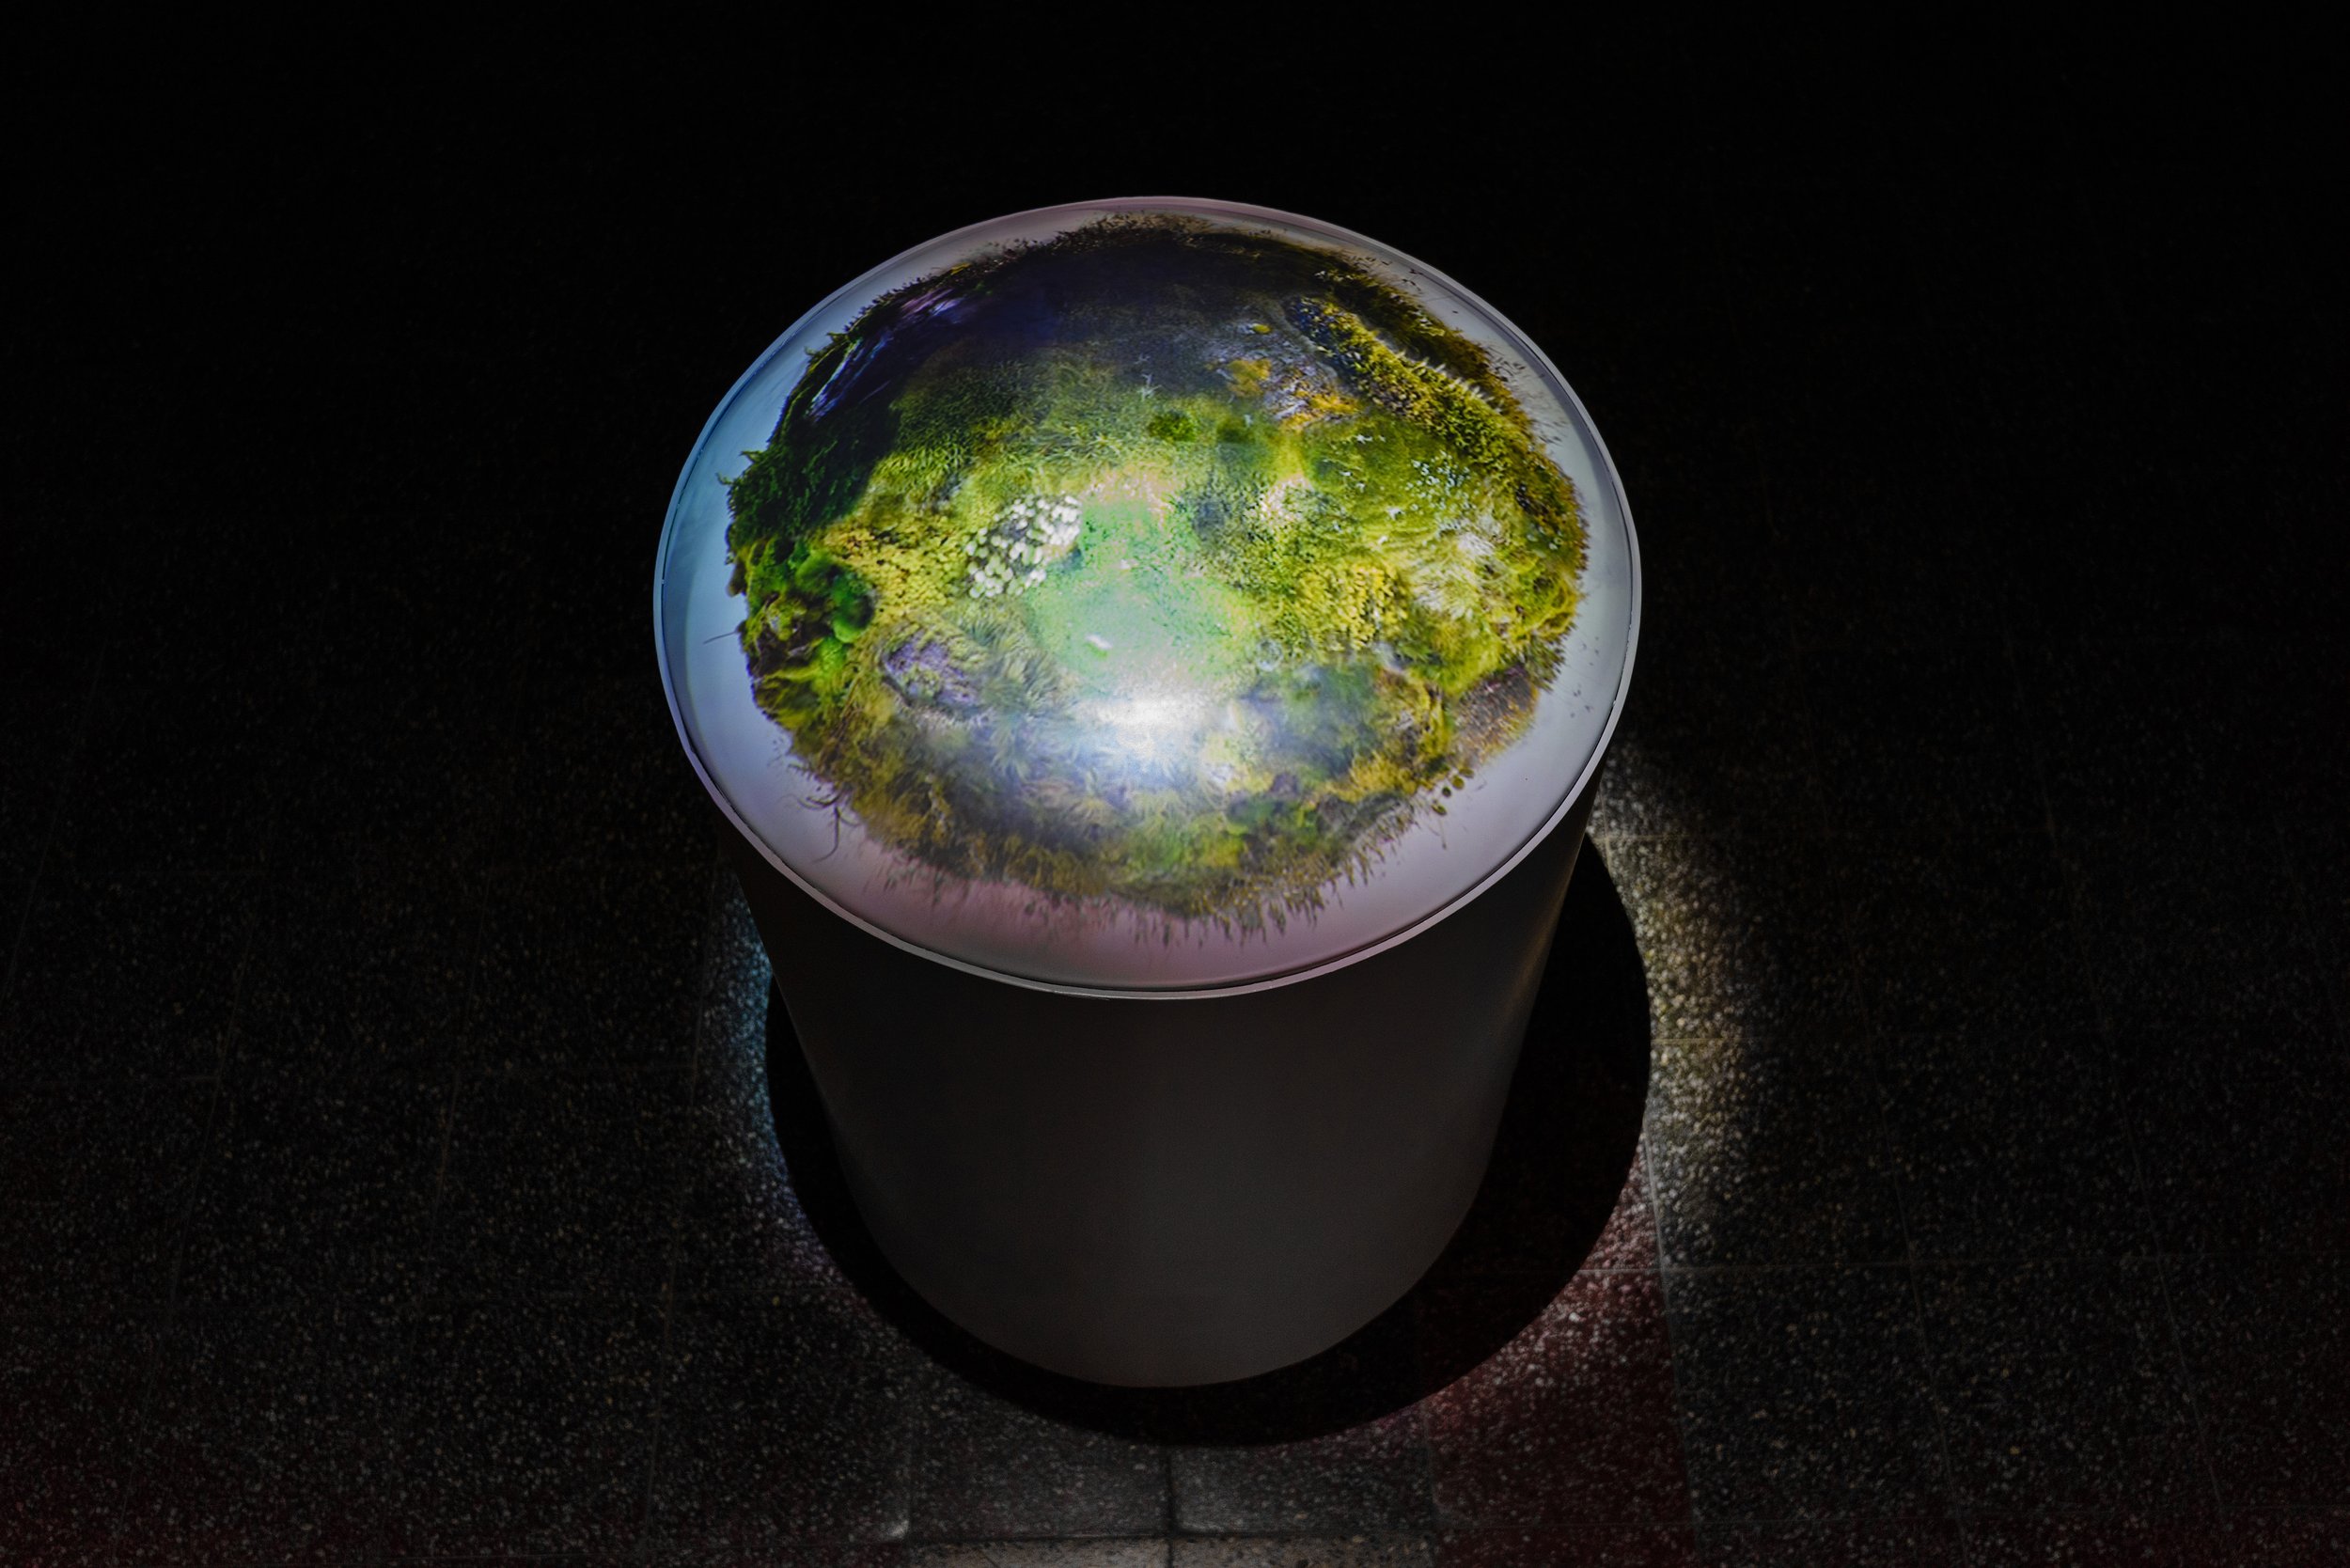  Rohini Devasher,  Terrasphere , 2015, single channel video projected onto pedestal with domed top 